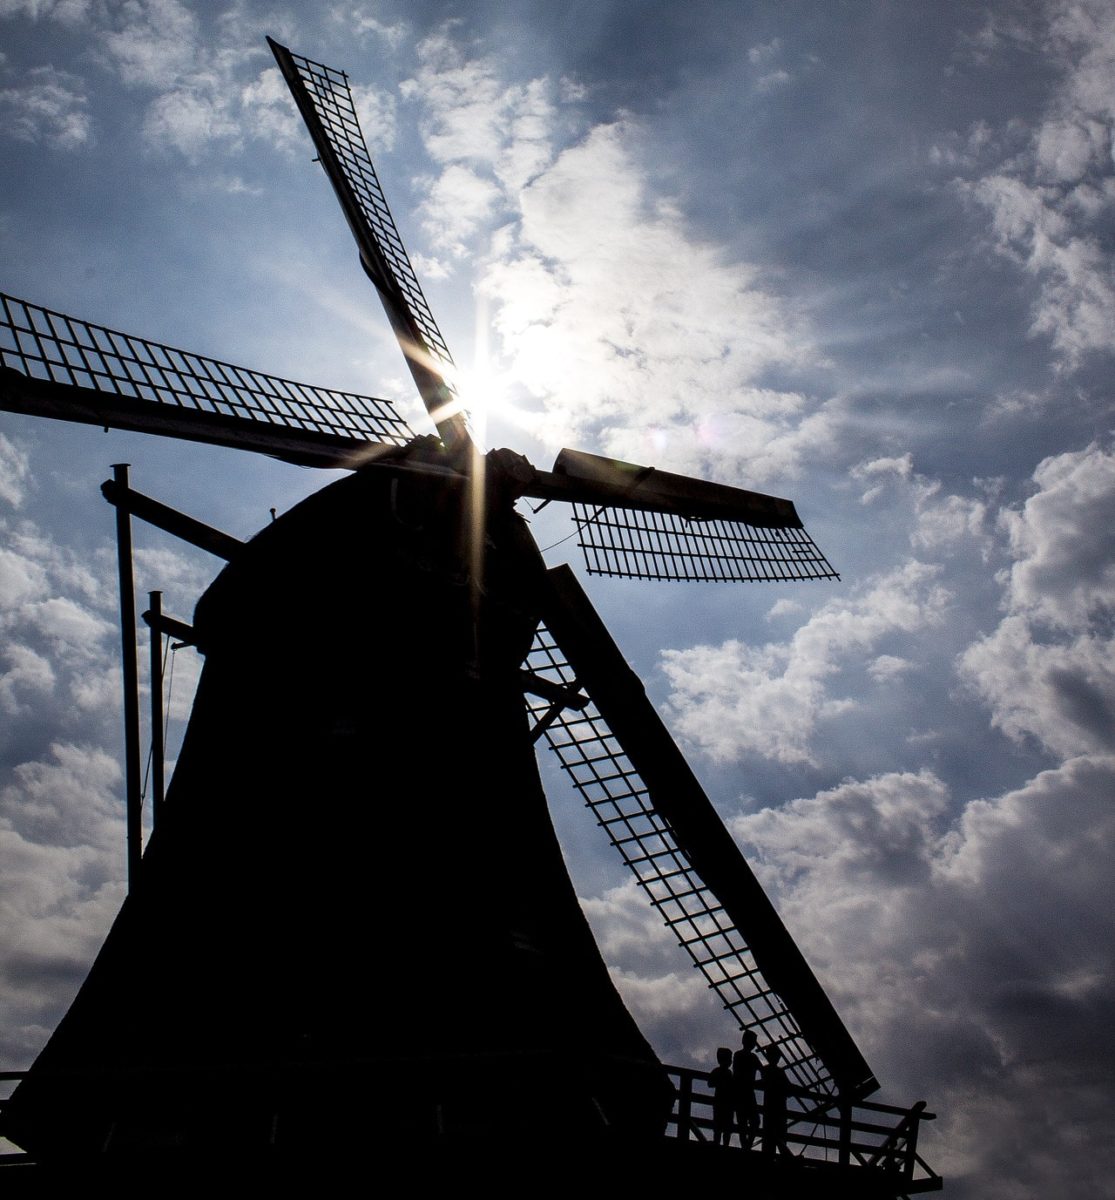 Netherlands may reach 132 GW of solar by 2050